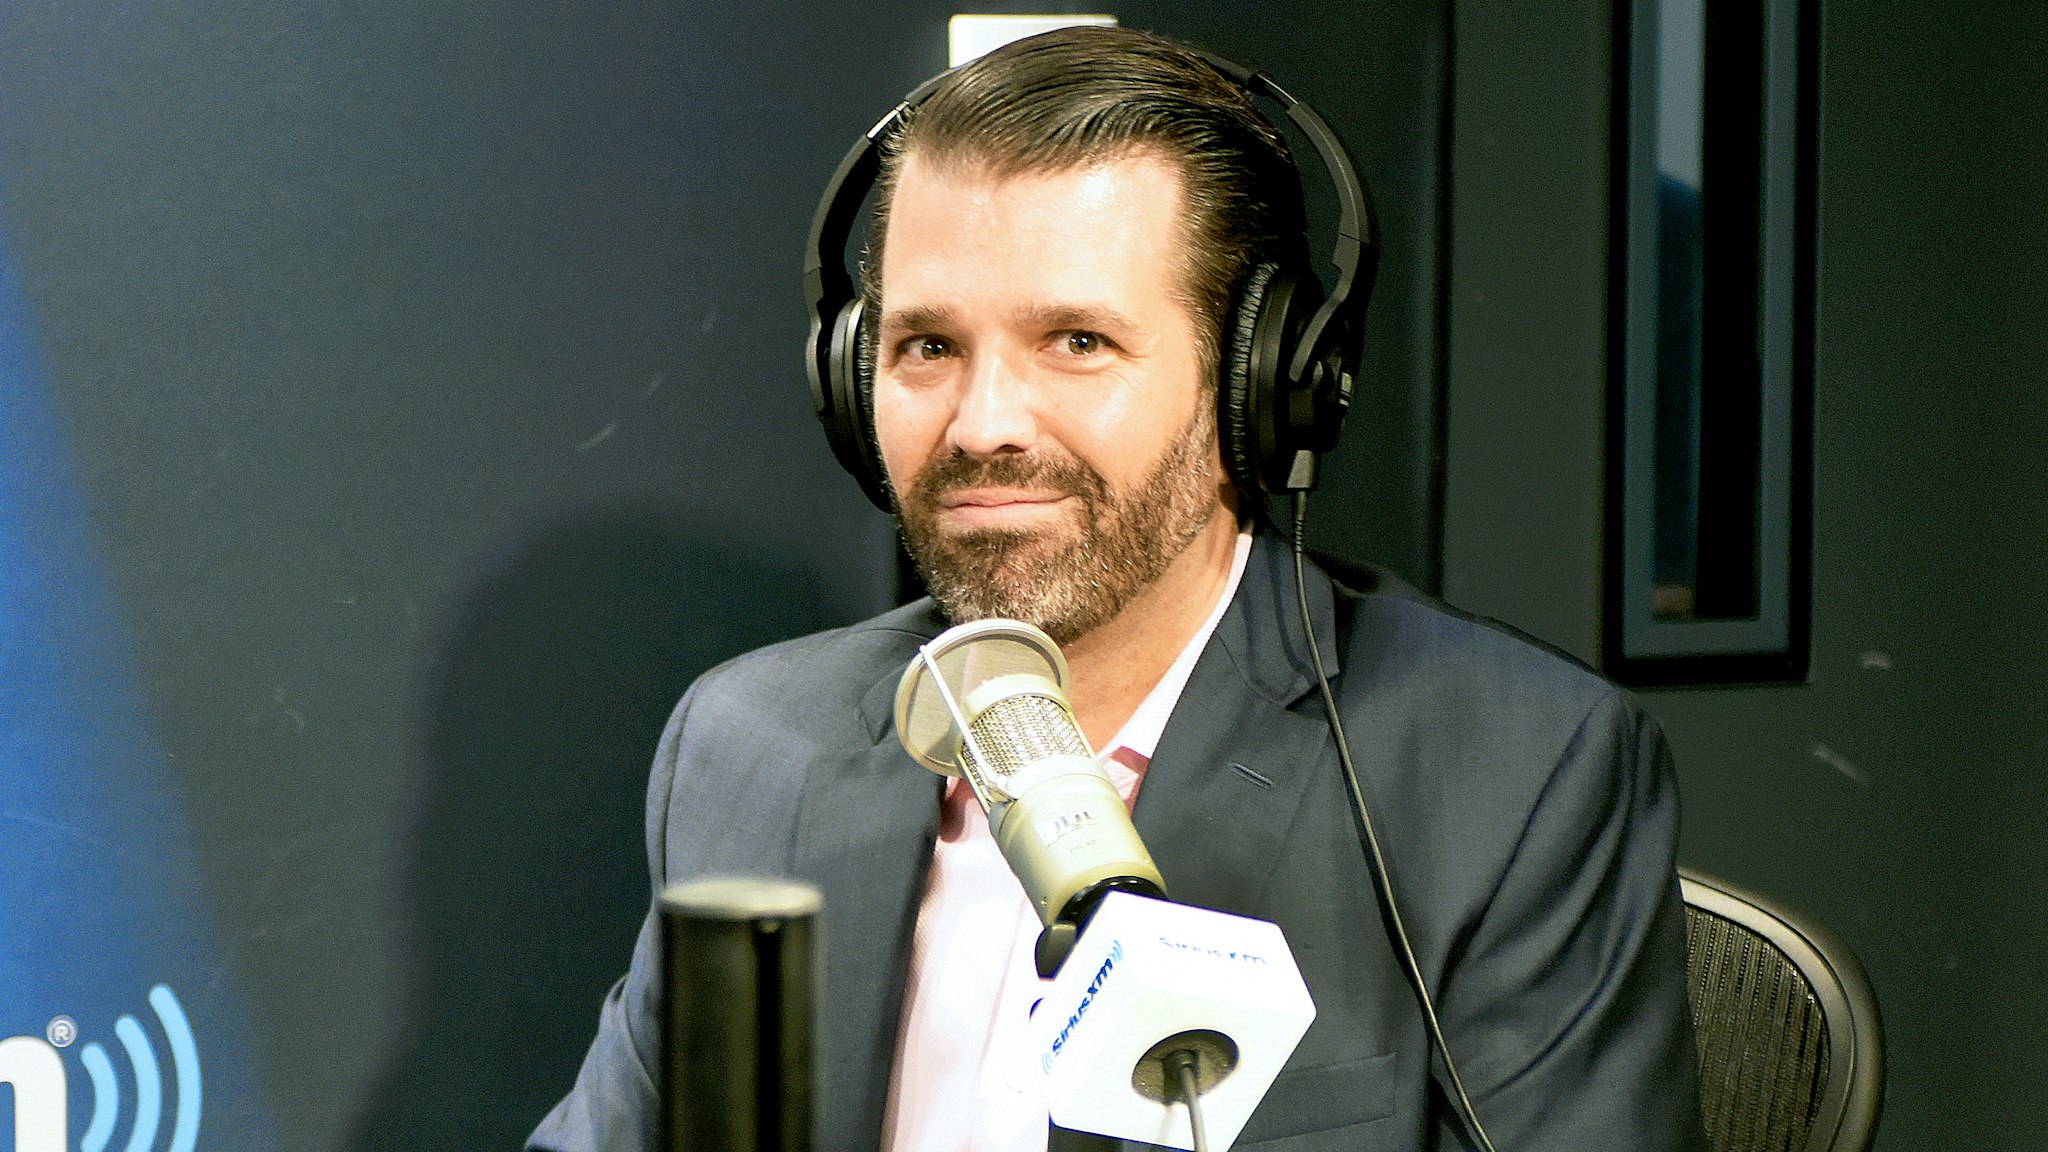 OCTOBER 31: (EXCLUSIVE COVERAGE) Donald Trump Jr. visits SiriusXM Studios on October 31, 2019 in New York City. (